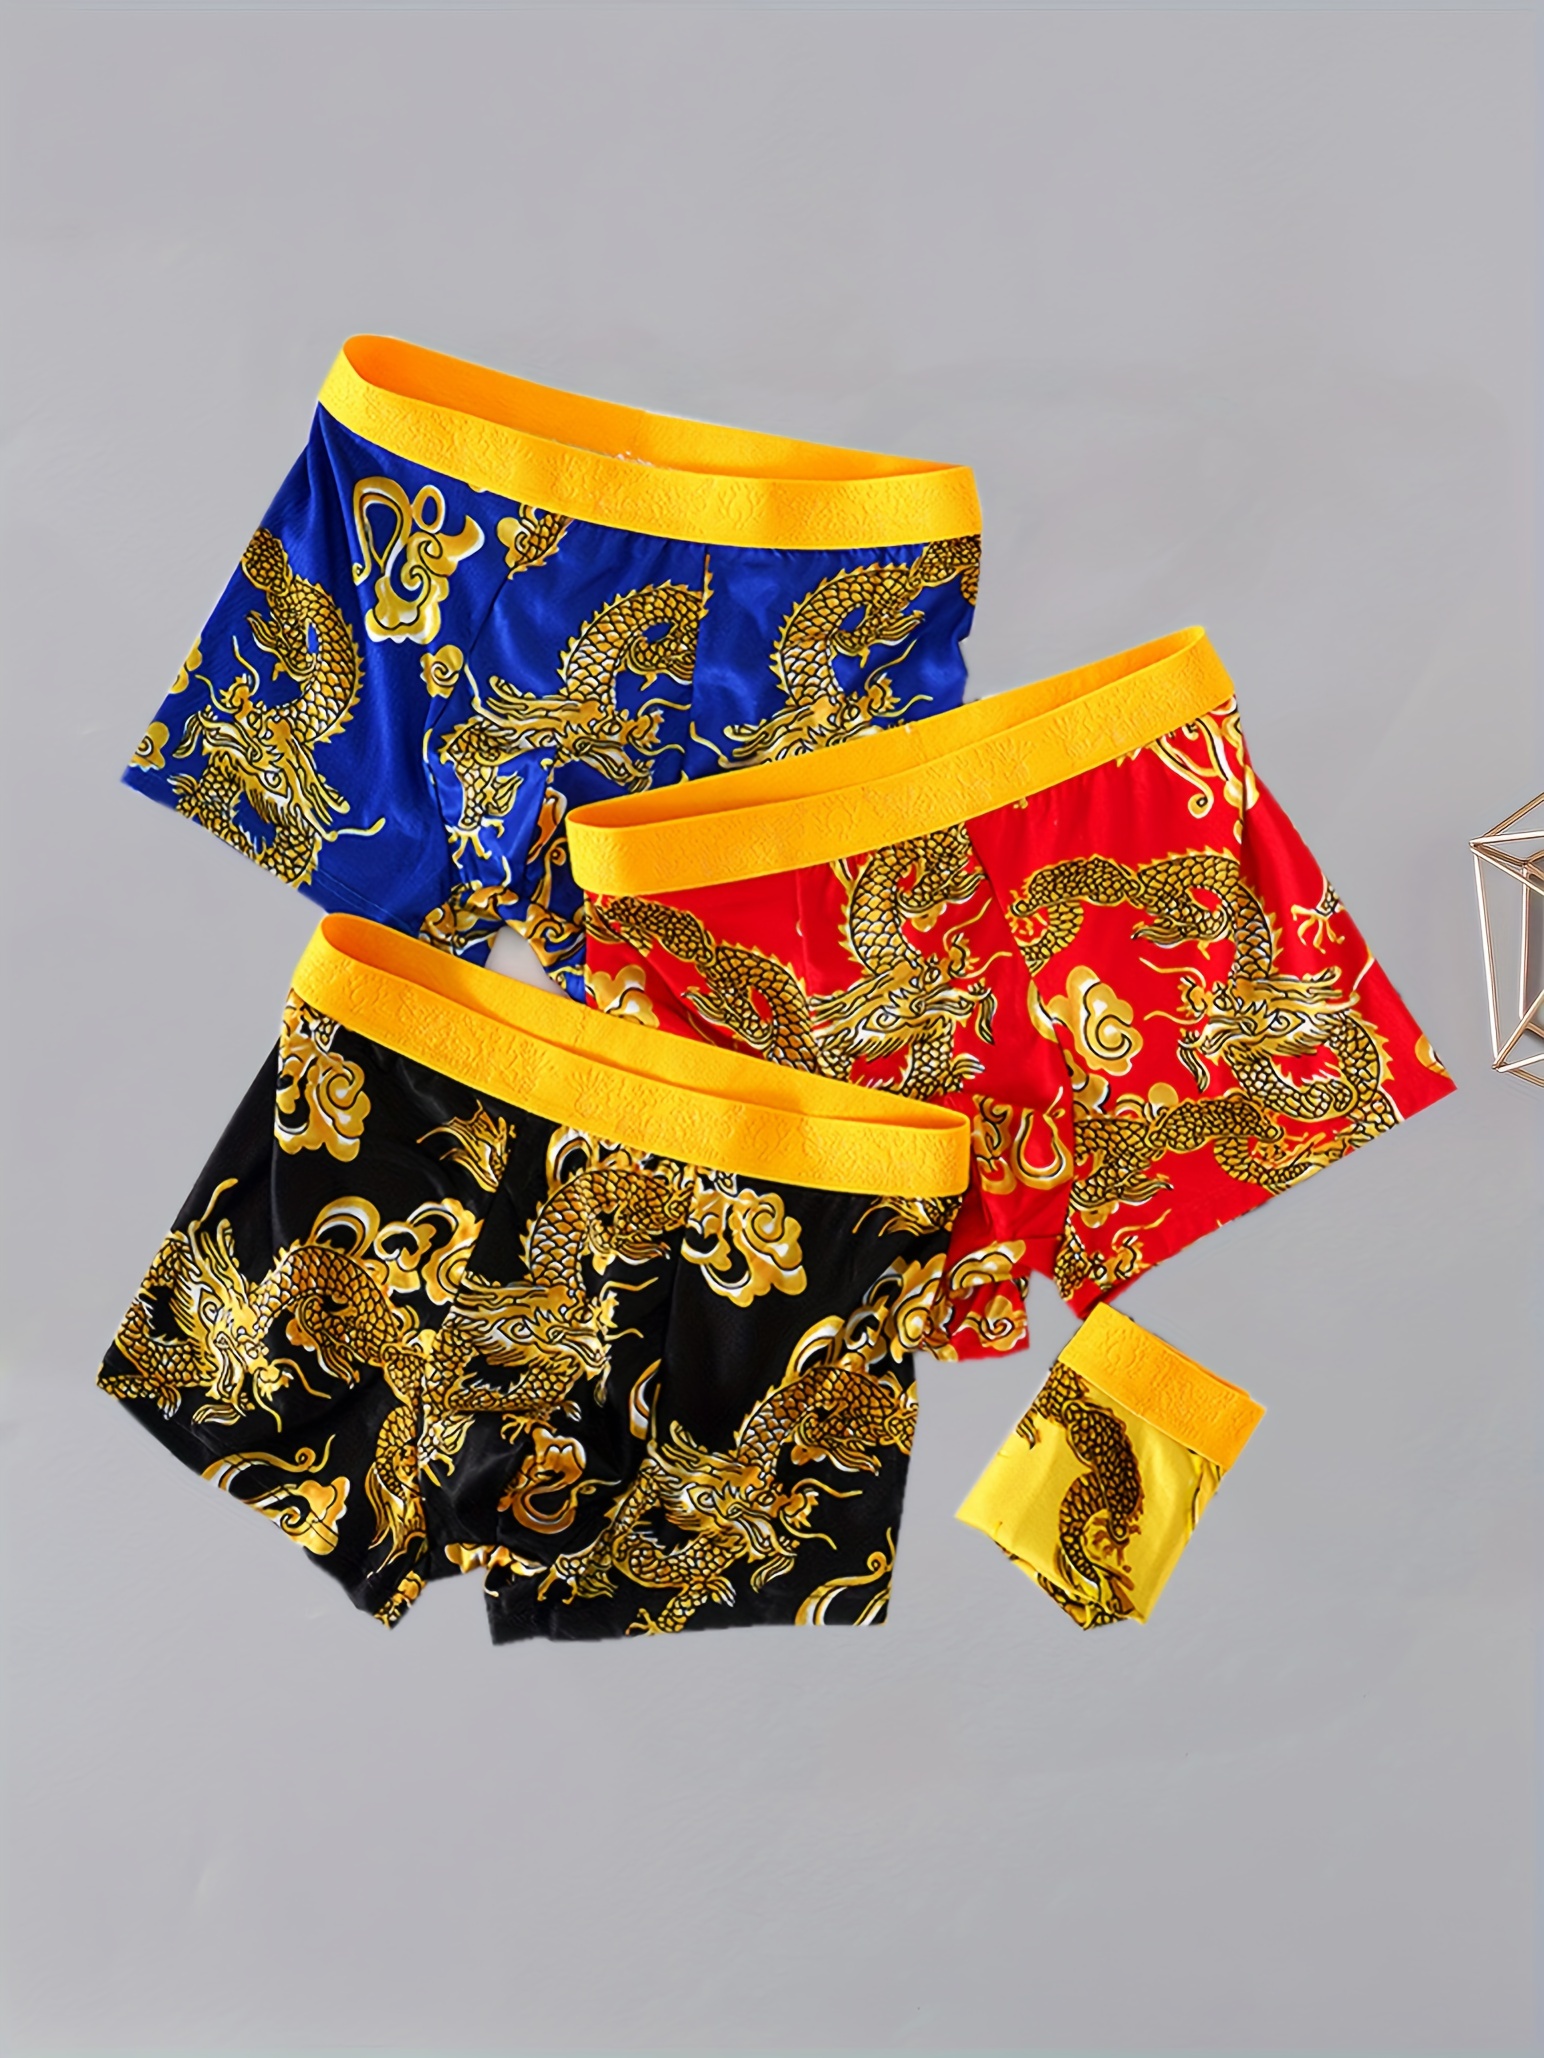 DanceeMangoo Chinese New Year FA CAI Men Underwear, Red Lucky Soft RABIT  Year Shorts Boxer Briefs Panties for Spring Festival 